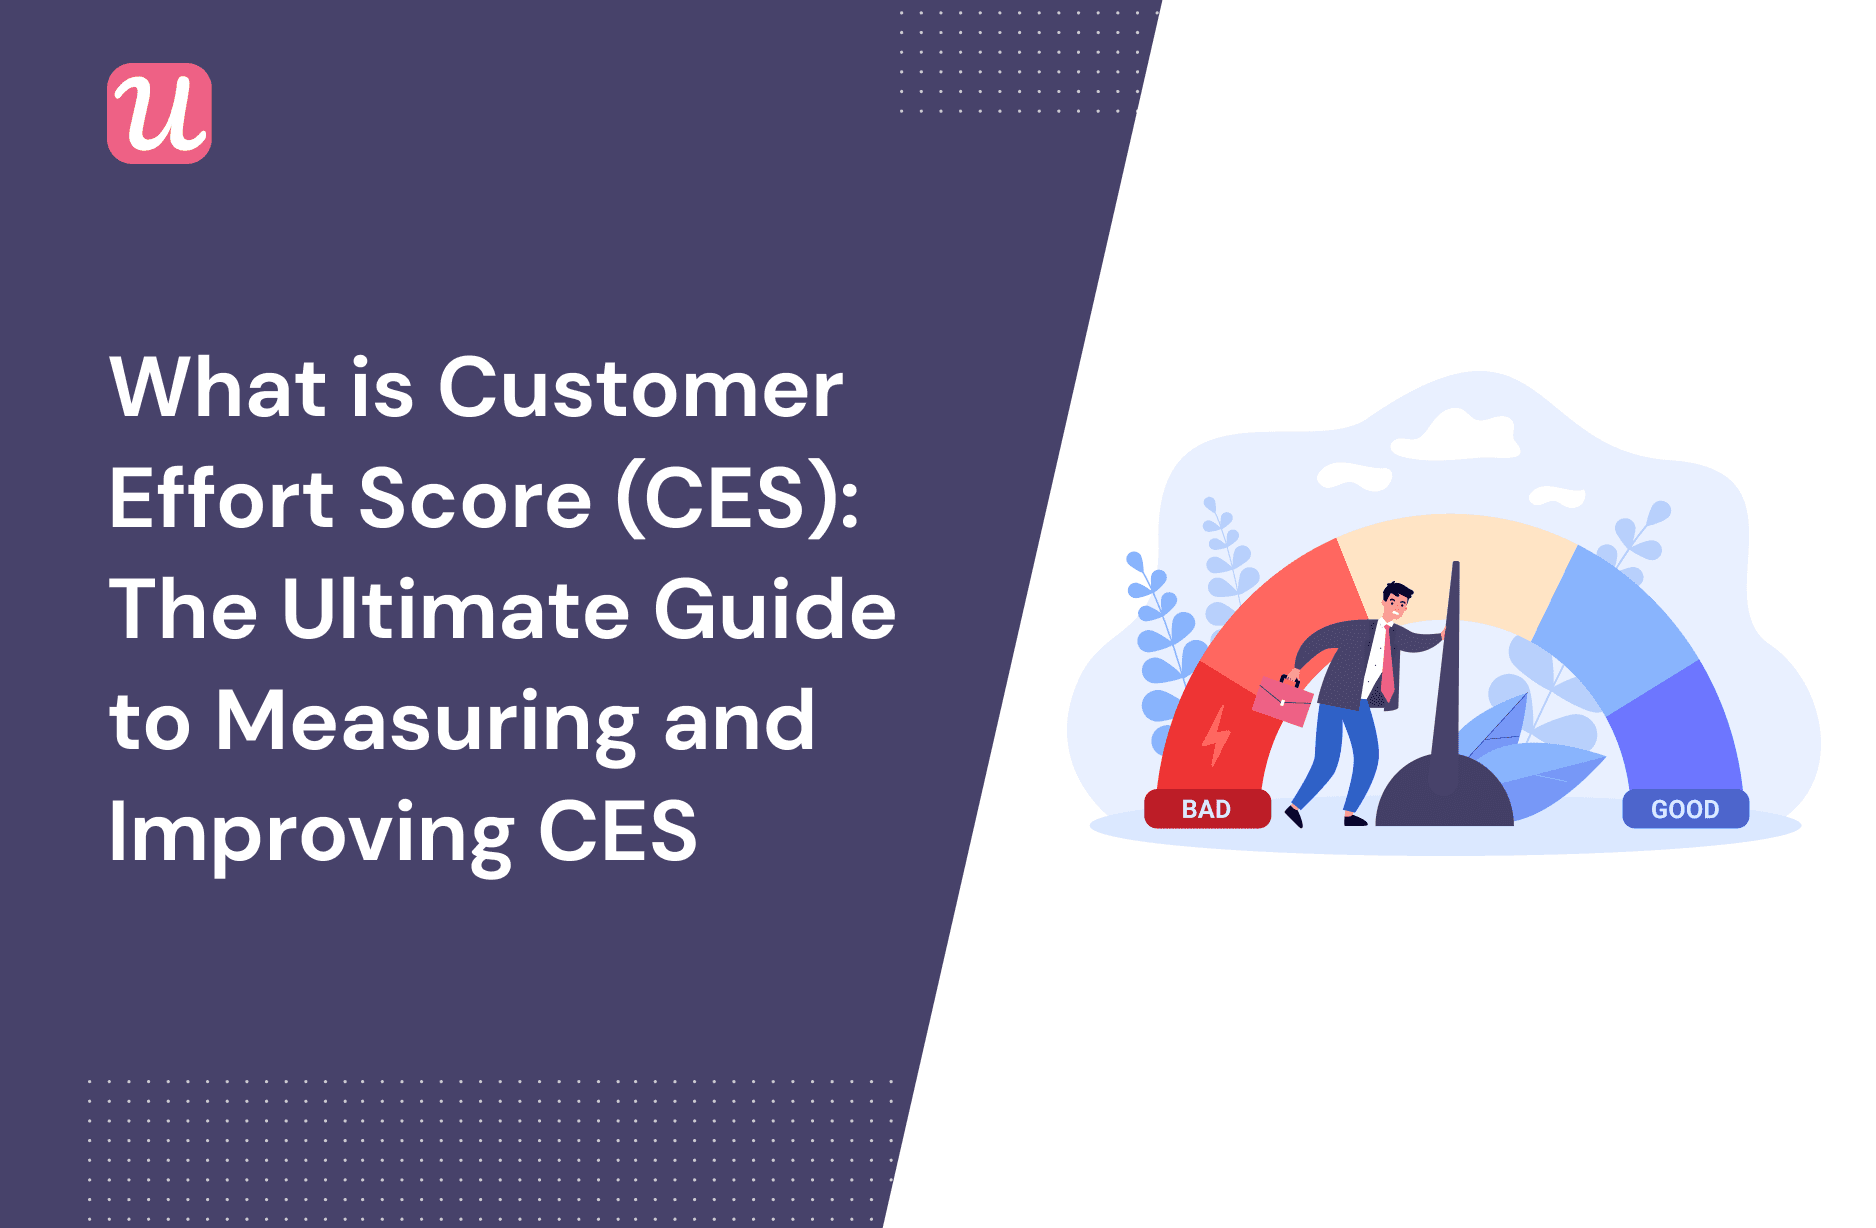 What is Customer Effort Score (CES): The Ultimate Guide to Measuring and Improving CES